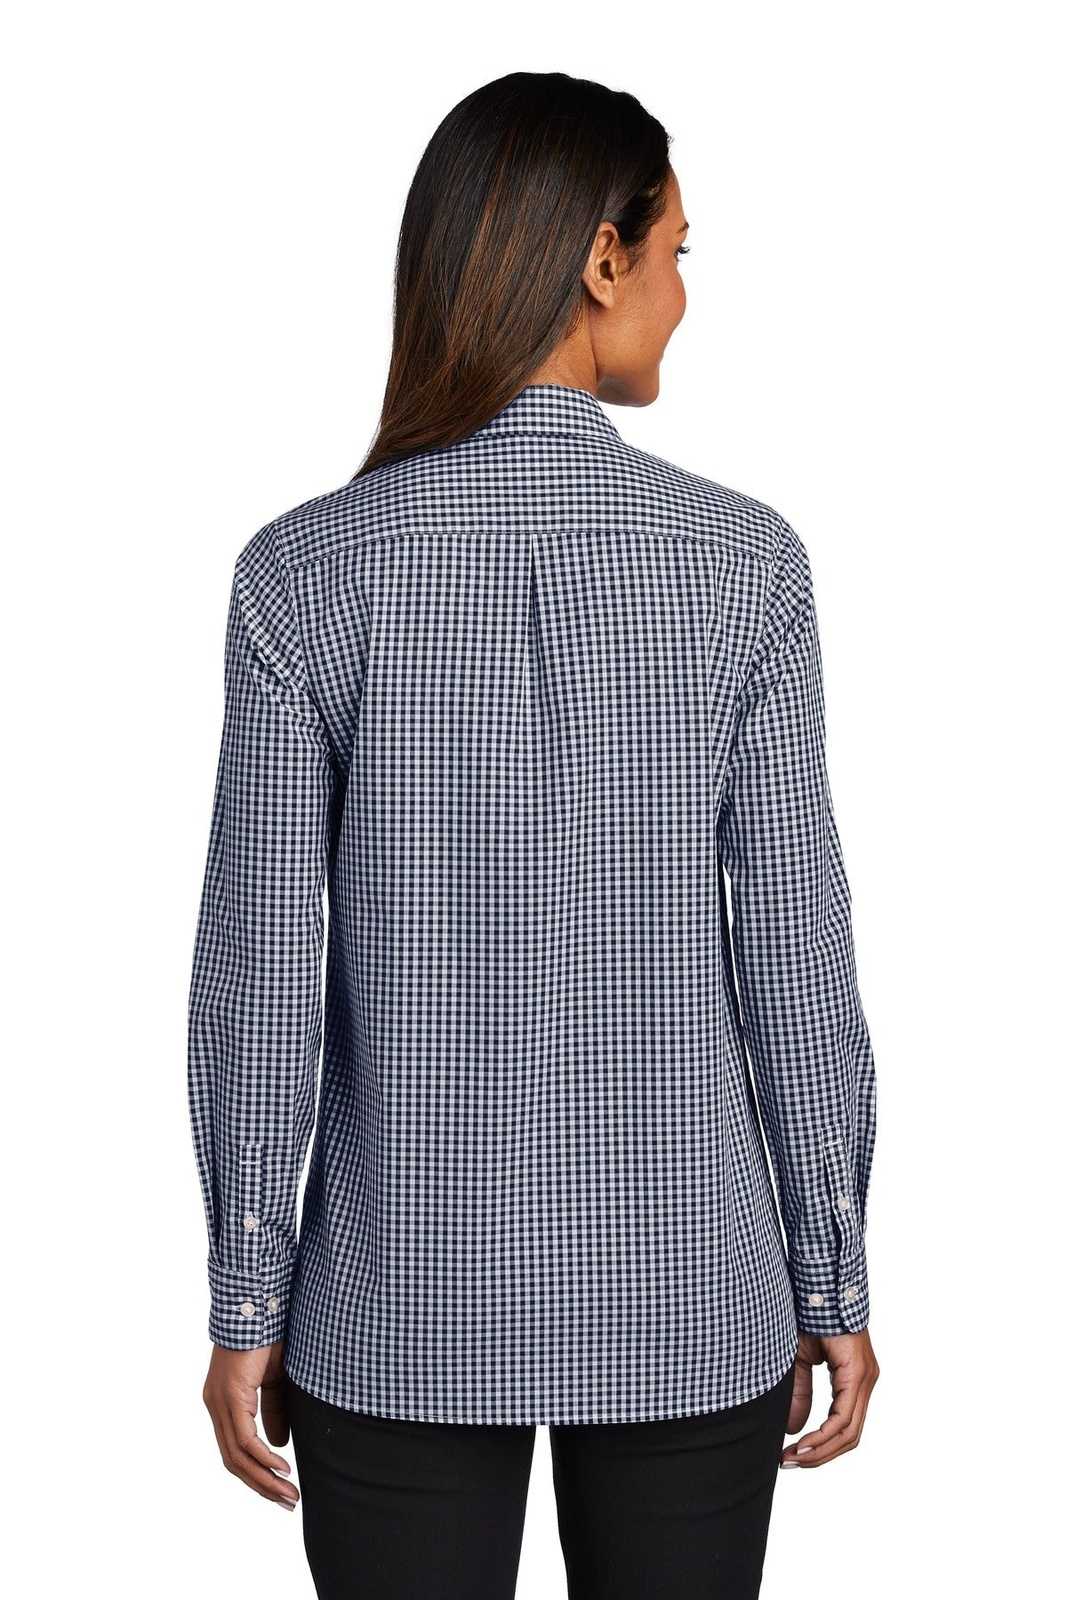 Port Authority LW644 Ladies Broadcloth Gingham Easy Care Shirt - True Navy White - HIT a Double - 2